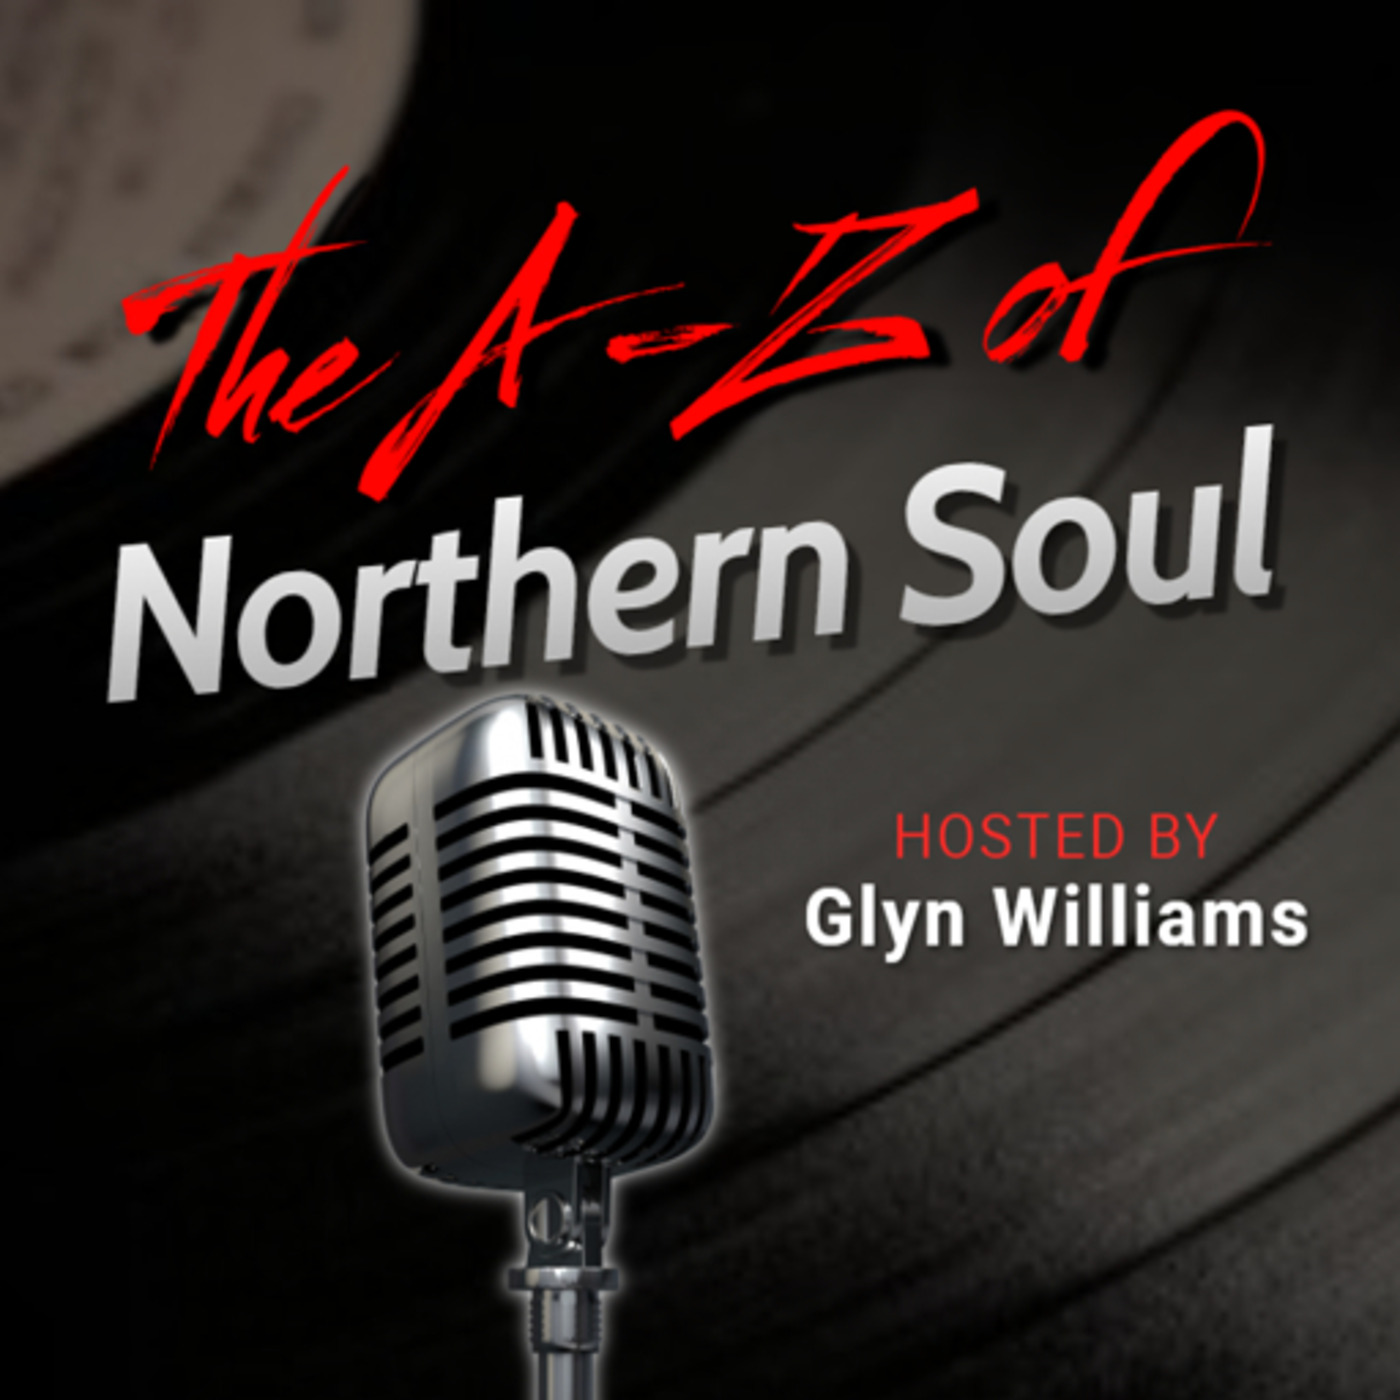 The A-Z of Northern Soul E068